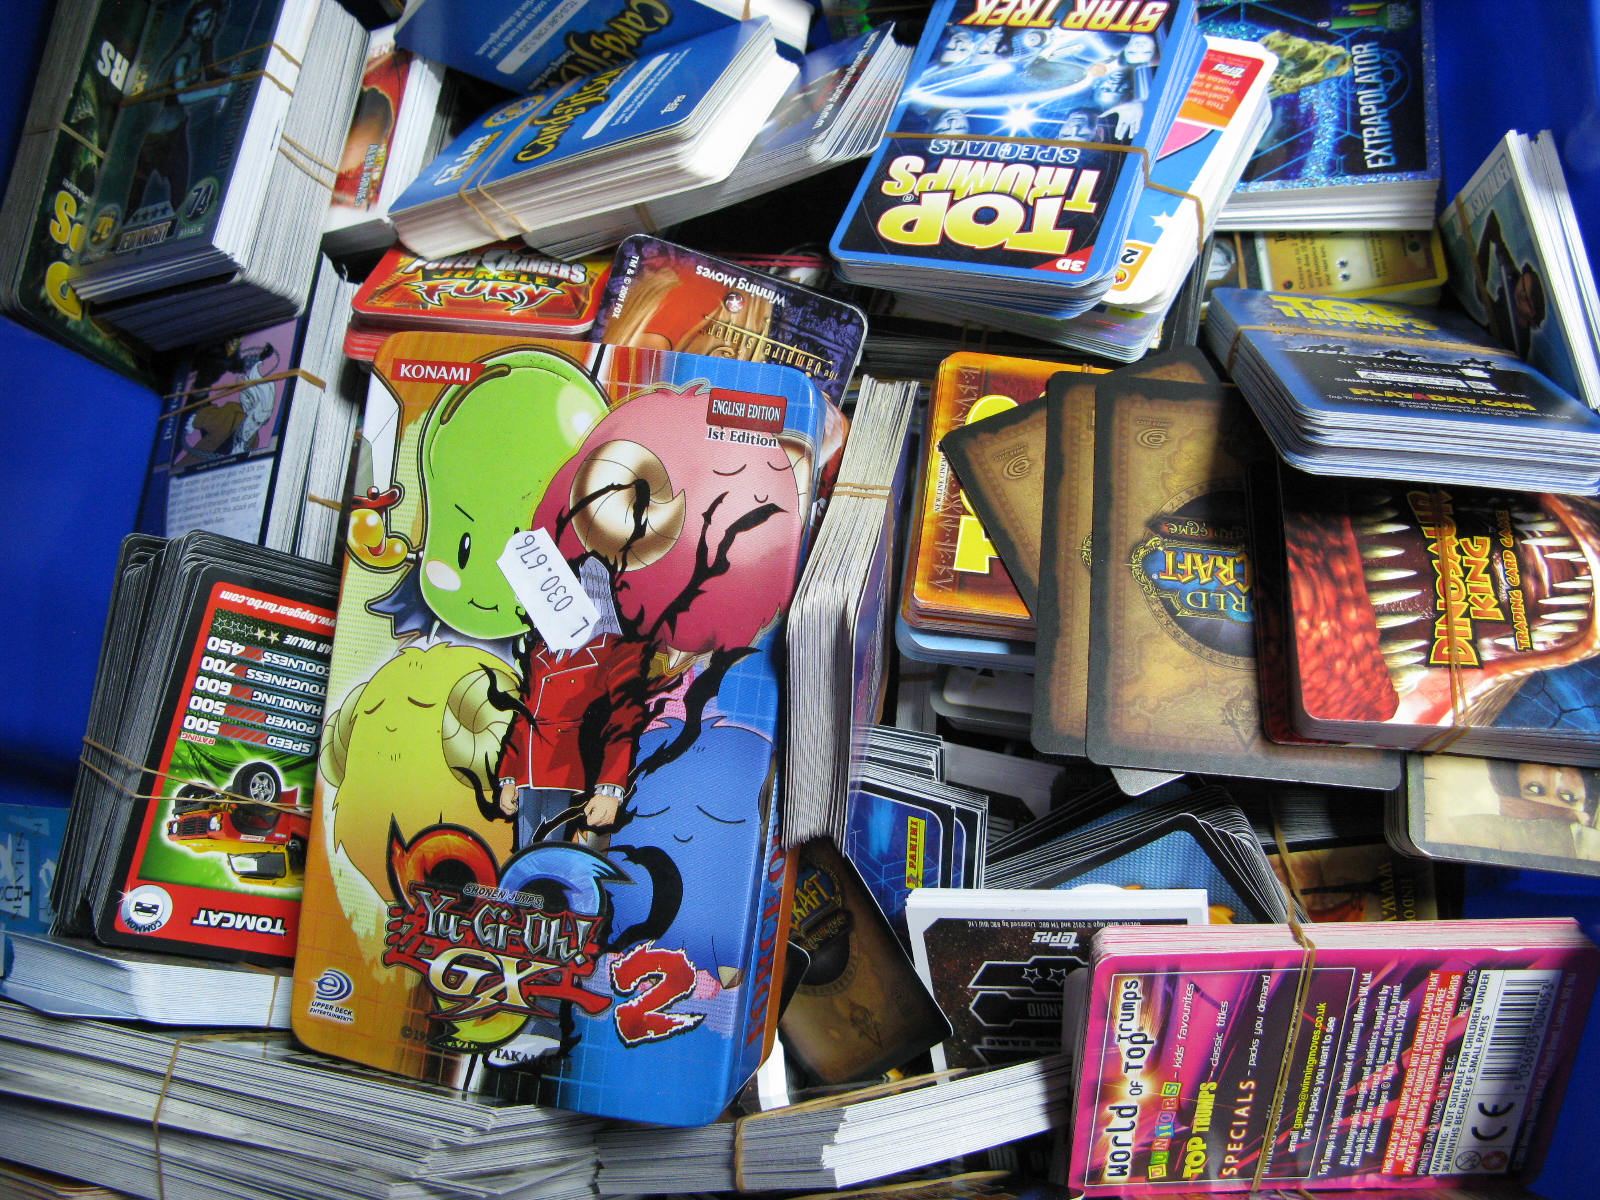 A Quantity of Modern Trade and Game Cards, by Top Trumps, Kunami, Topps, Panini and other, Thematics